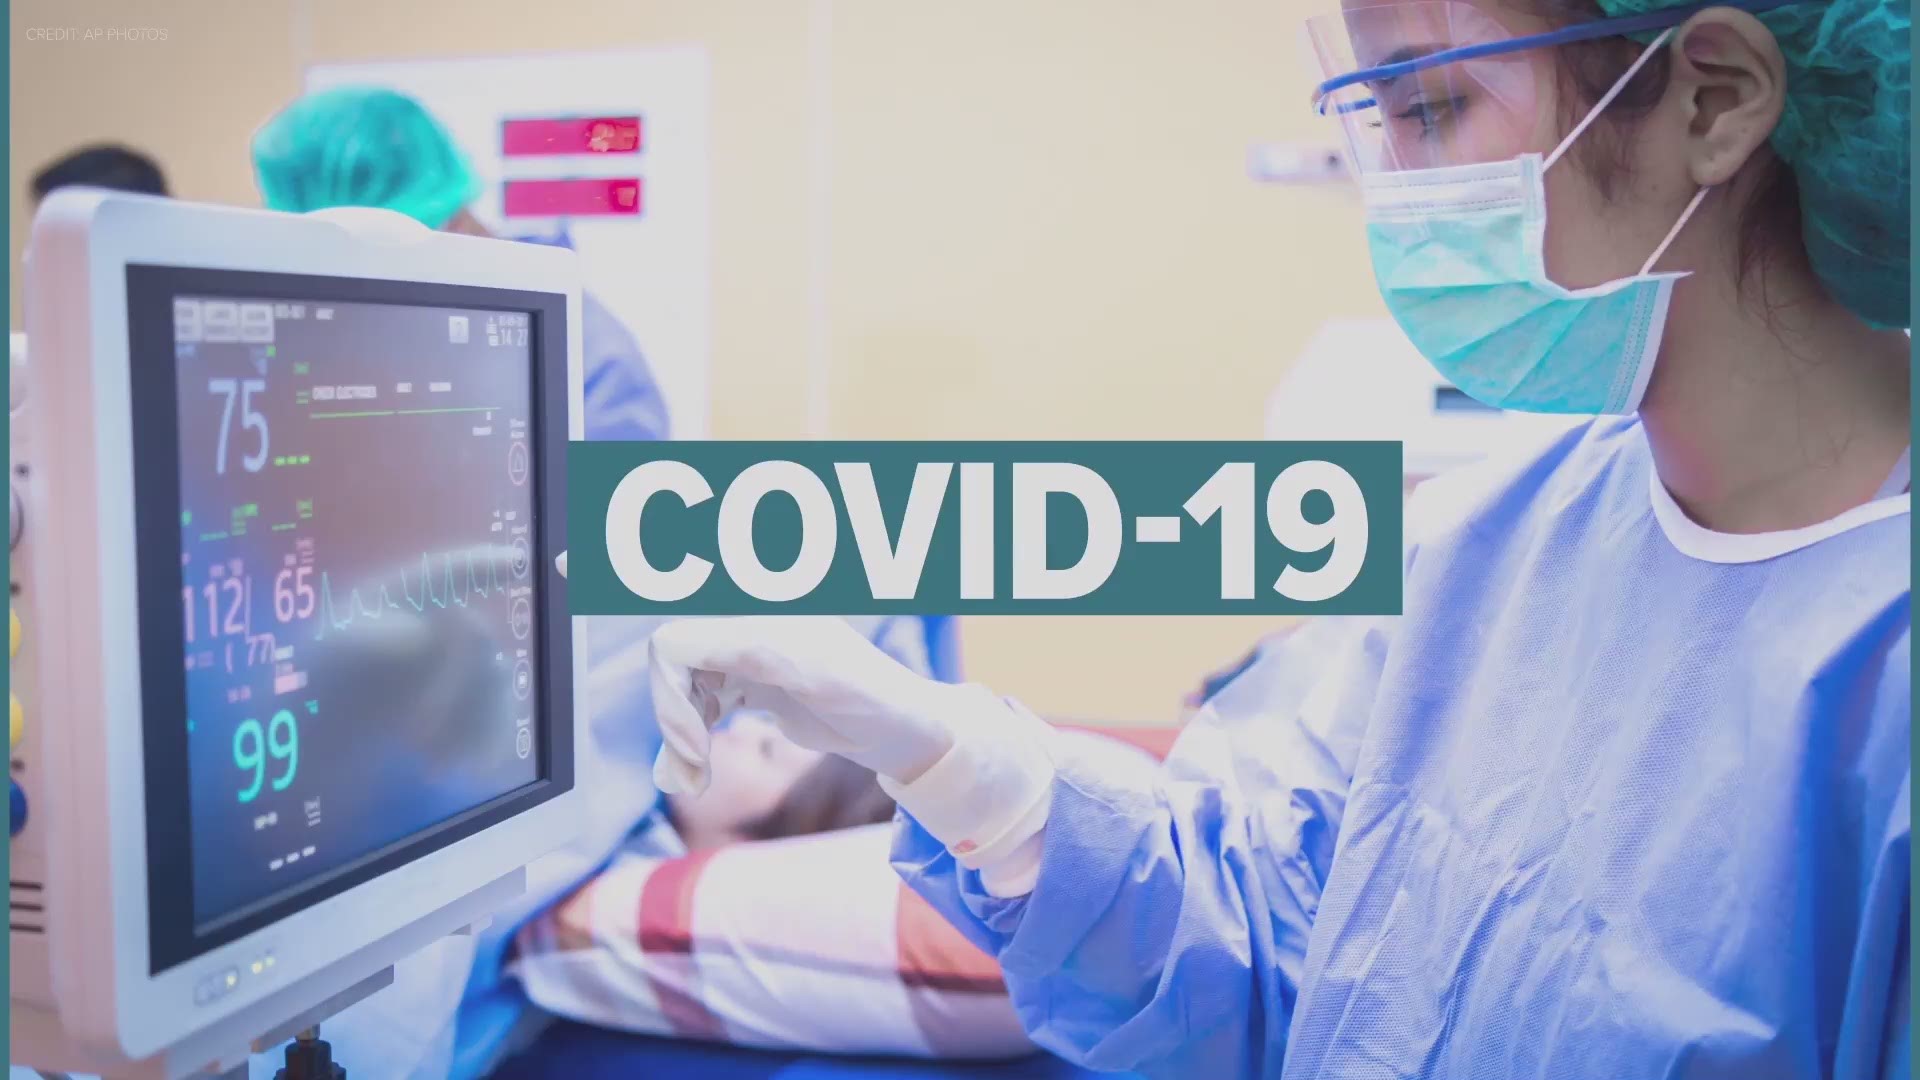 The number of coronavirus cases in Arizona has reached 14,170 as of Monday, with 686 coronavirus-related deaths. Here's the latest COVID-19 update.